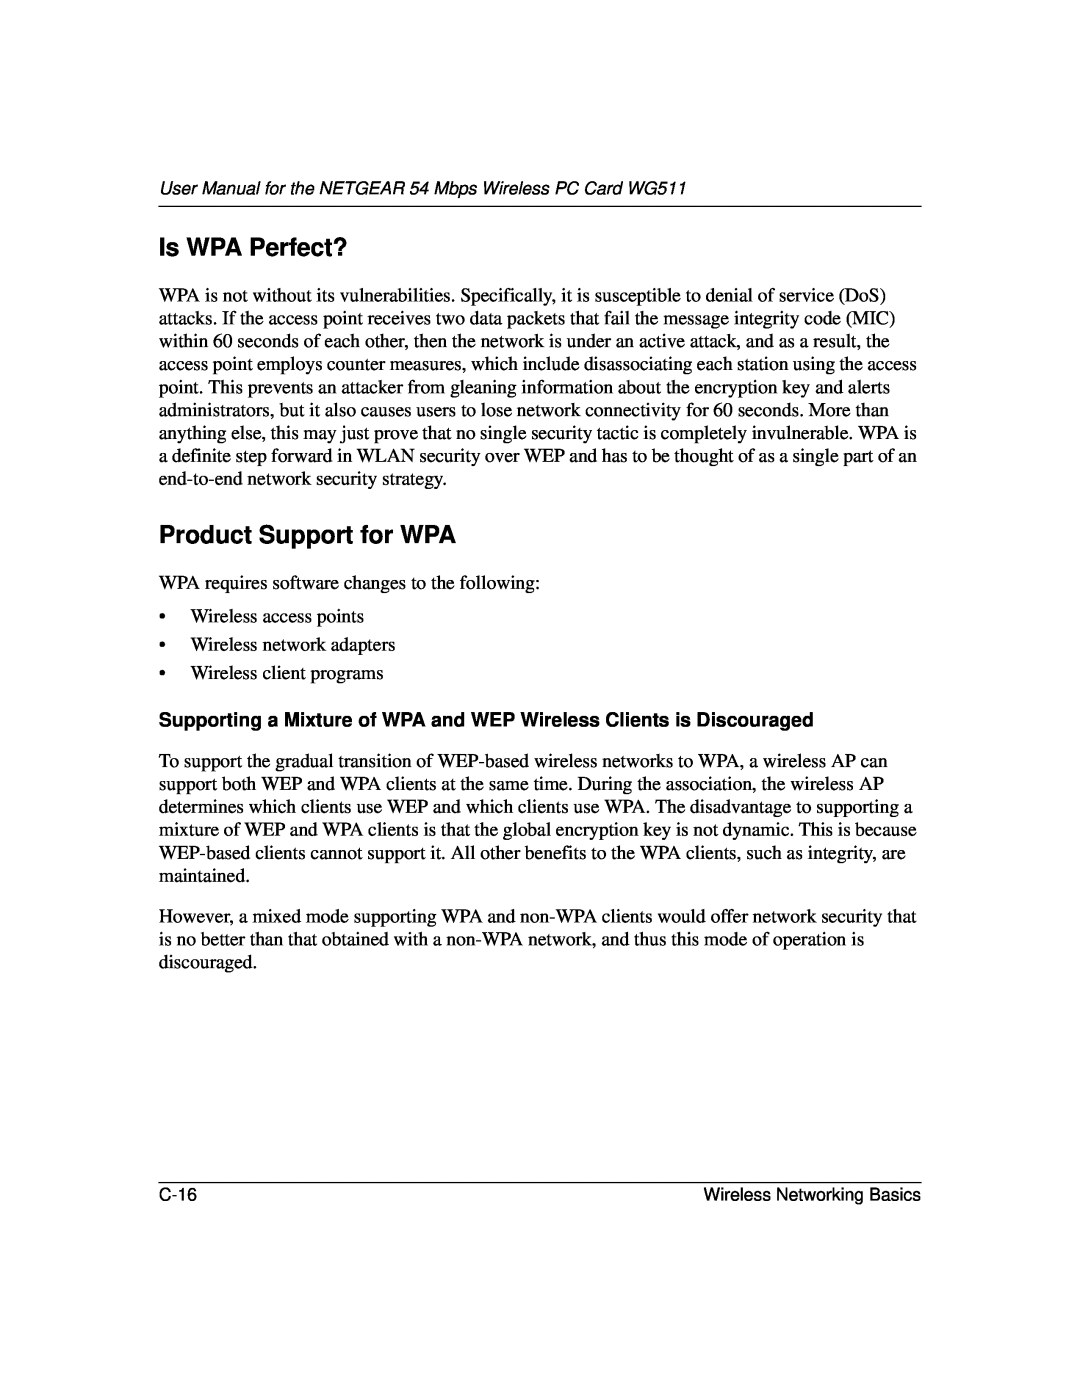 NETGEAR WGE111 user manual Is WPA Perfect?, Product Support for WPA 